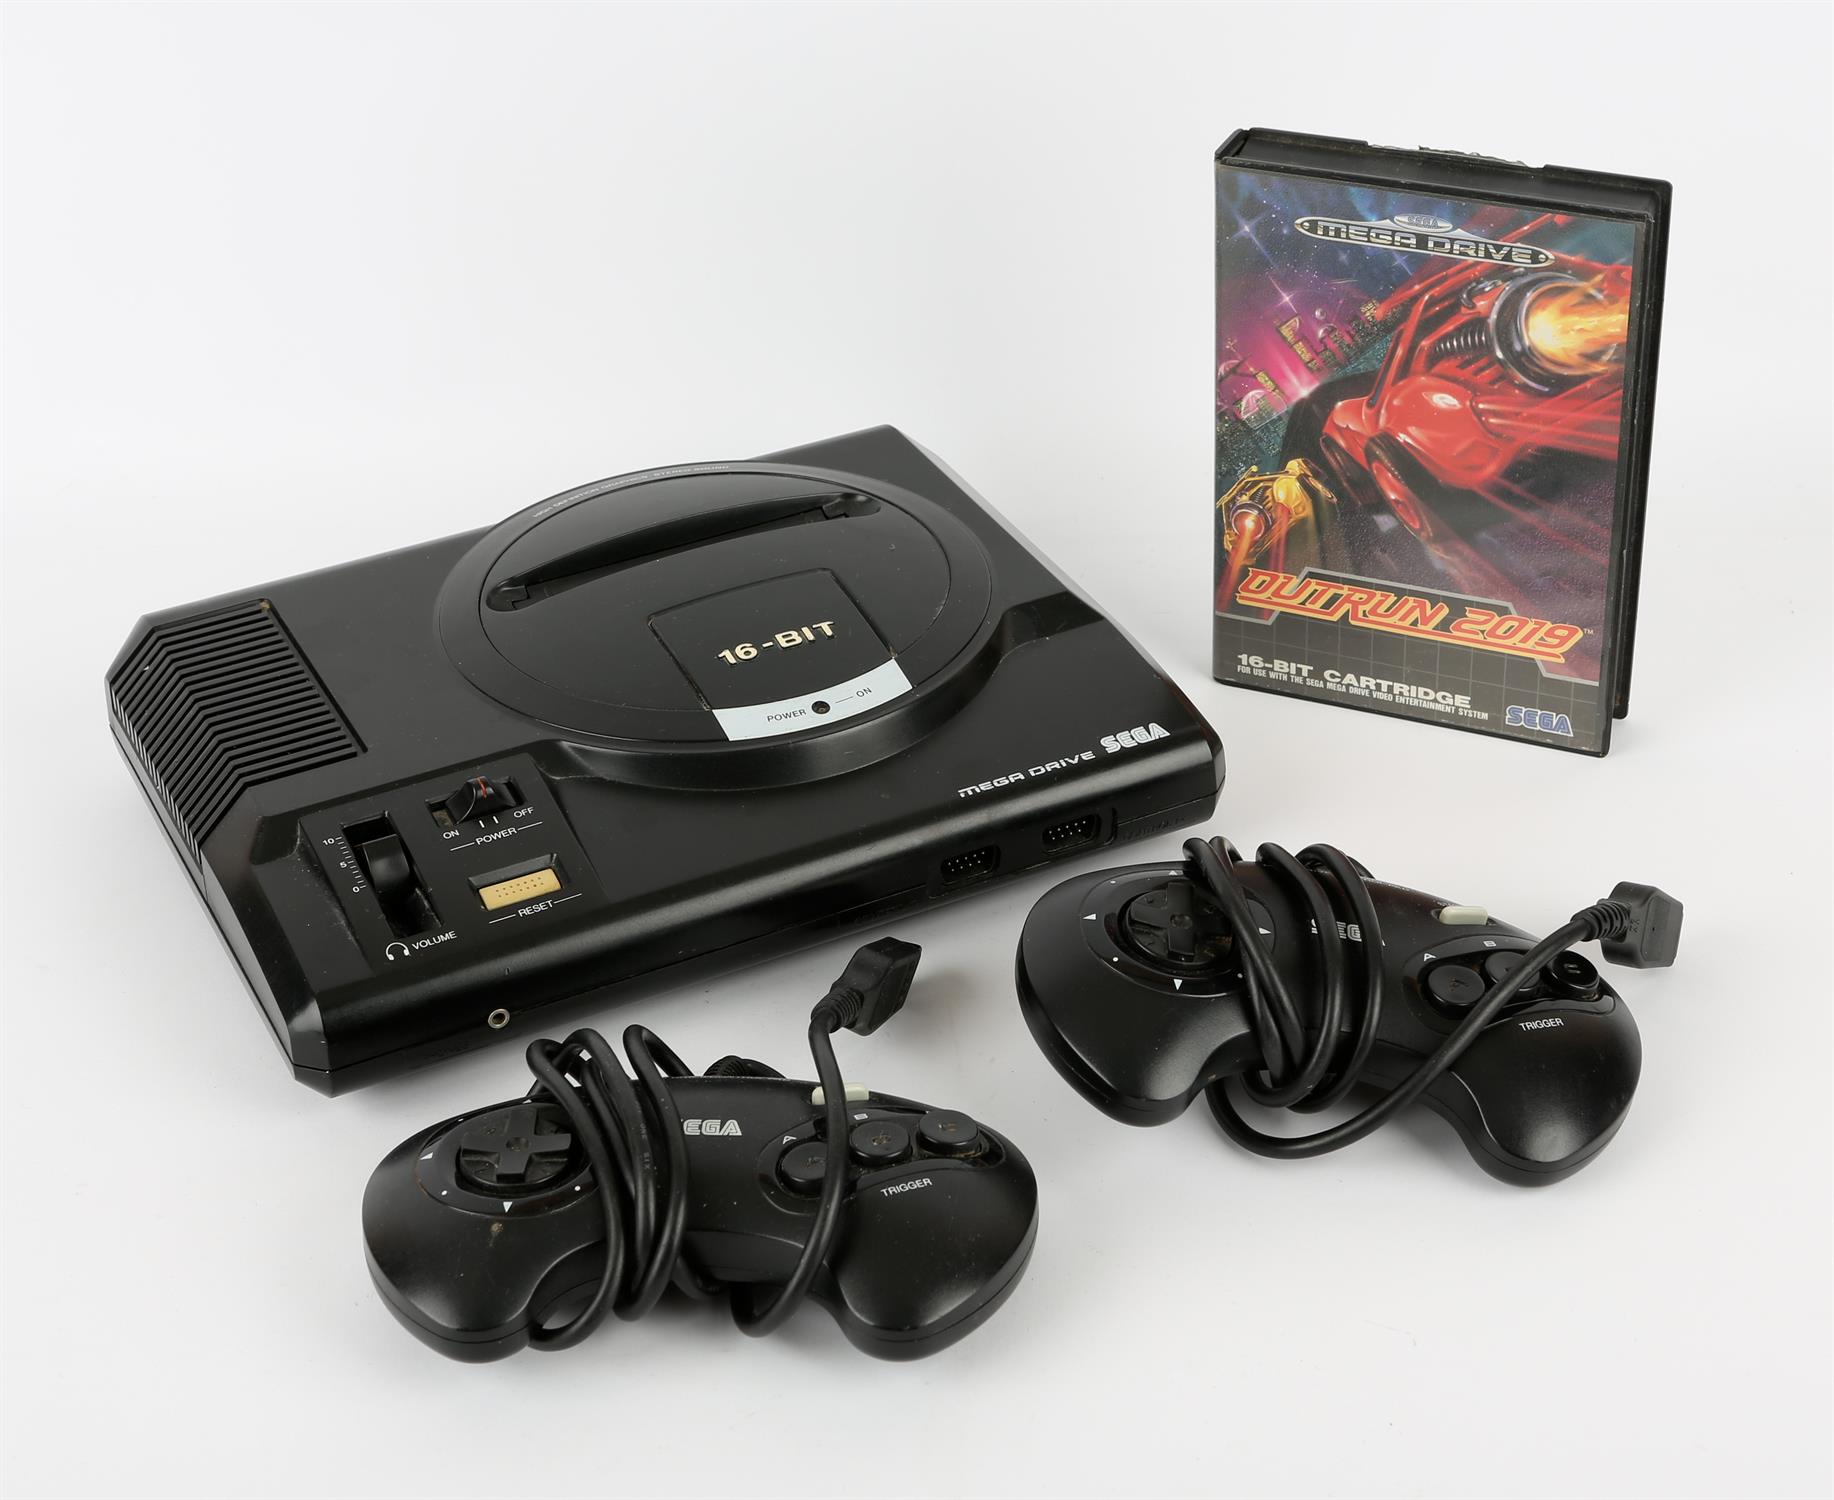 Sega Mega Drive Console with 2 controllers, power supply and OutRun 2019 All items are used and